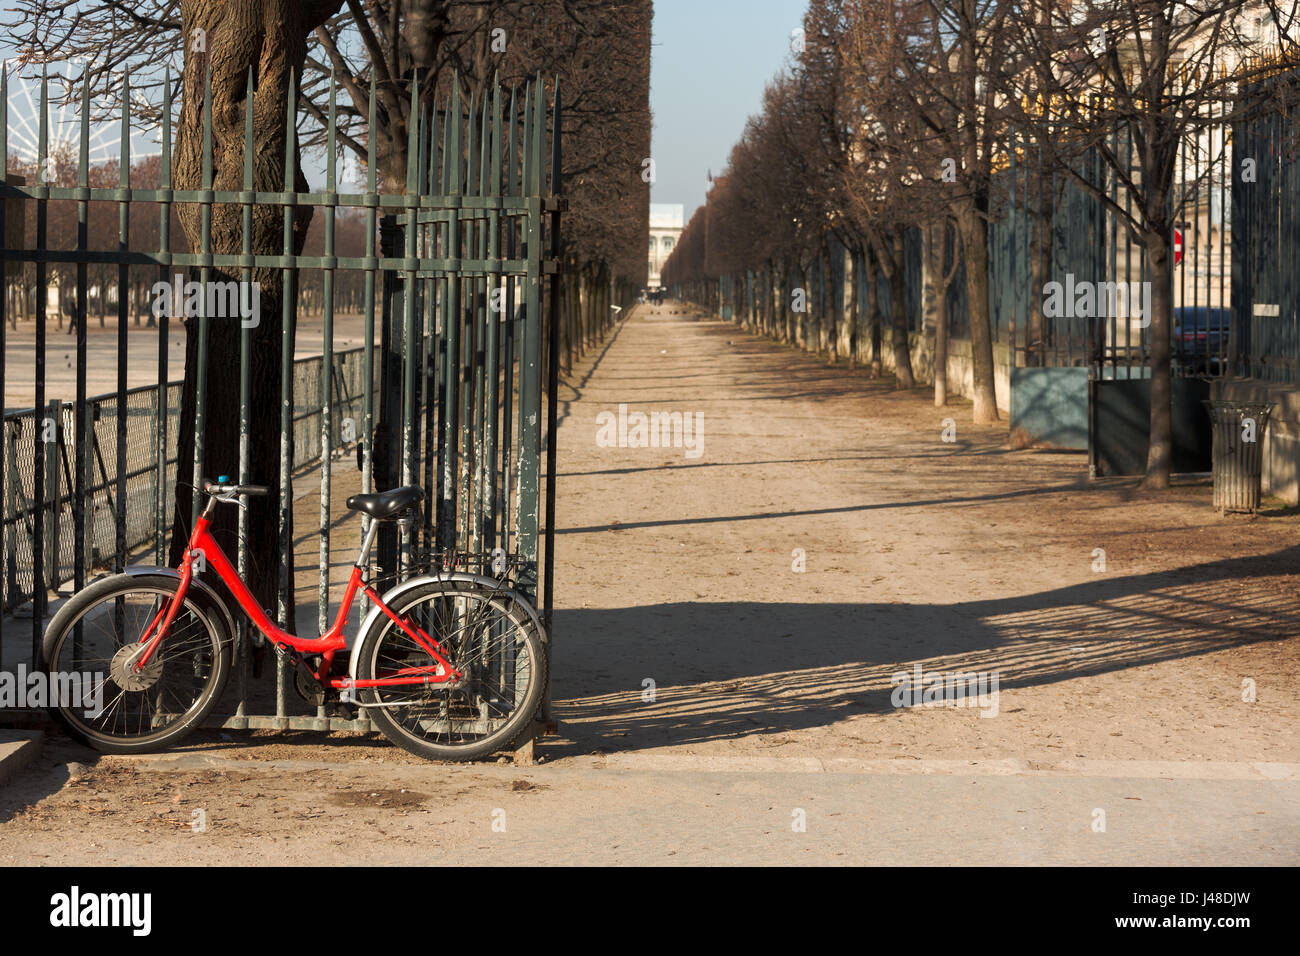 Jardin des Tuileries ( Tuileries Garden ) n Paris.The garden is one of the most famous park in Europe. Stock Photo